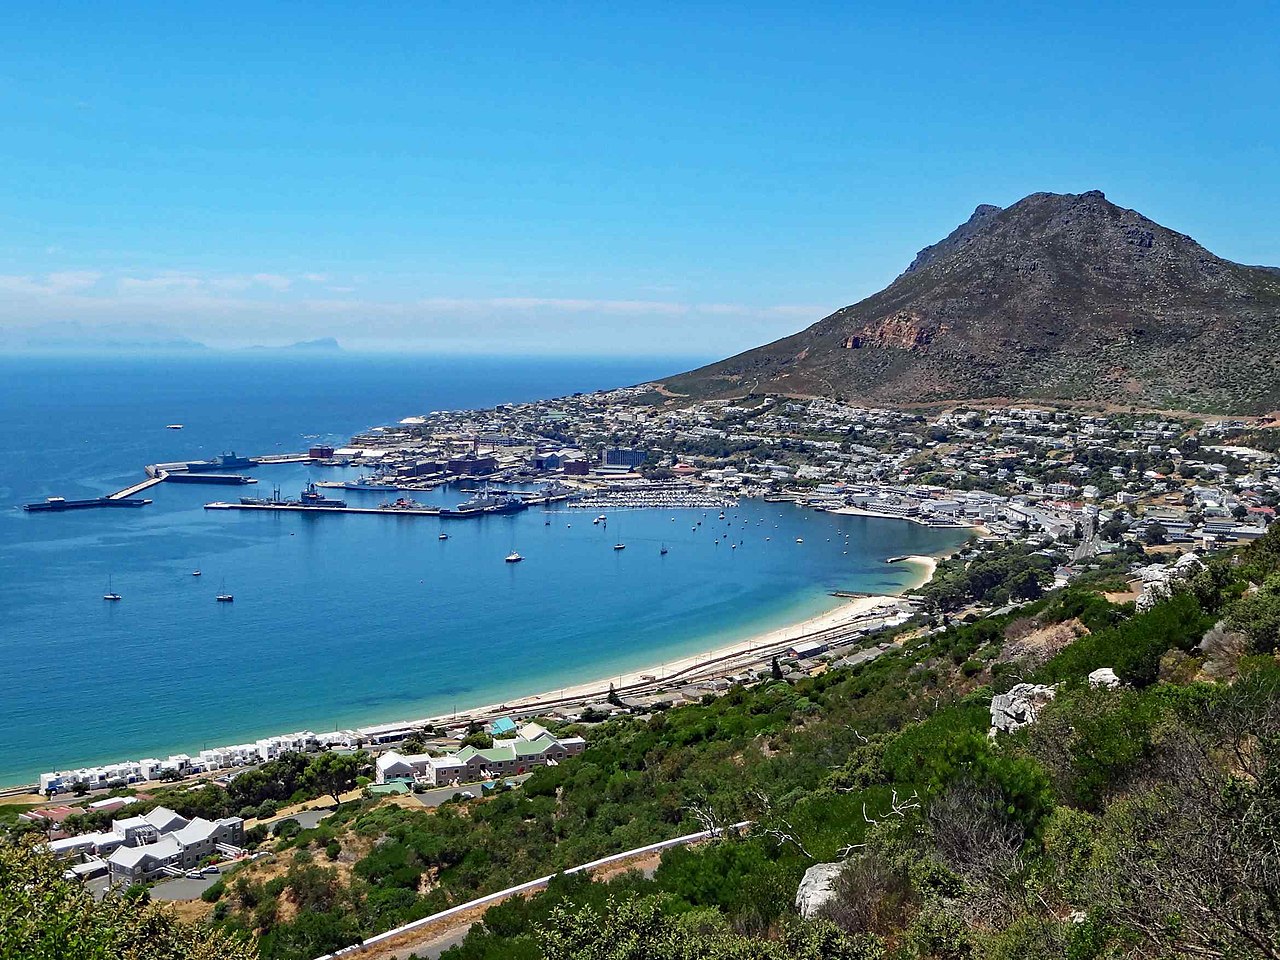 The famous bay of Simon's Town close to Cape Town by Simon's Town